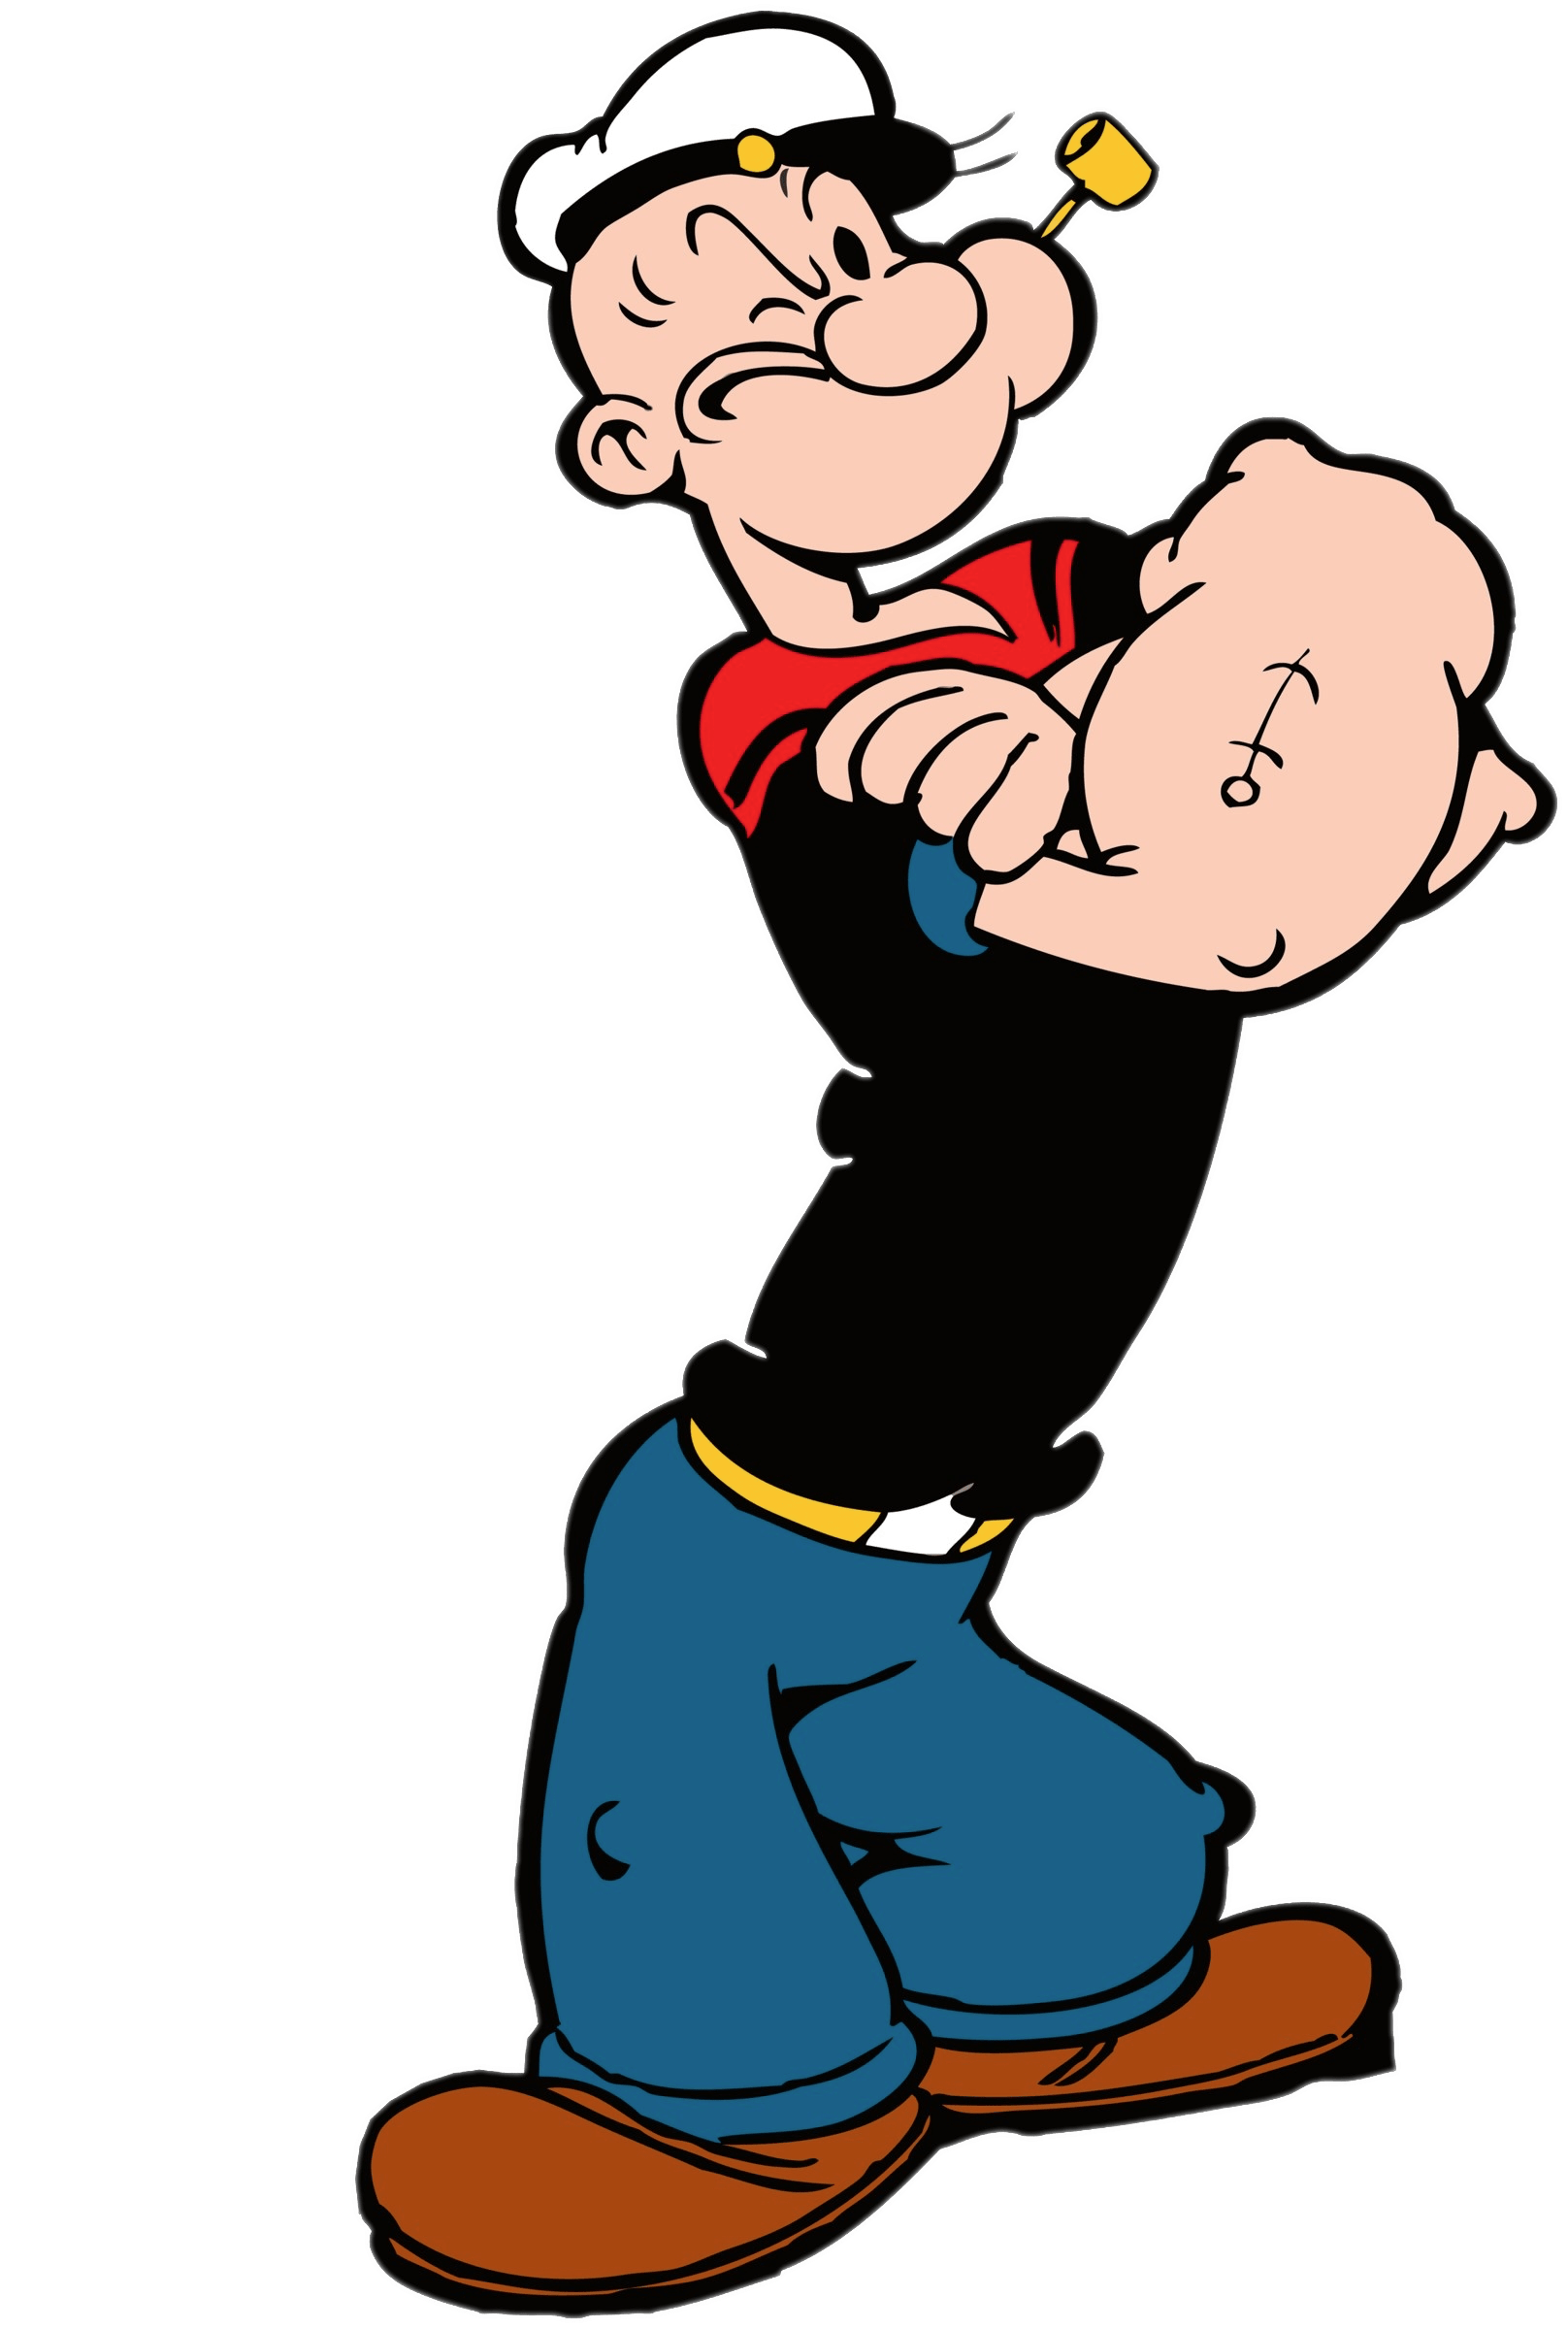 Popeye arms crossed transparent. Sailor clipart olive oyl